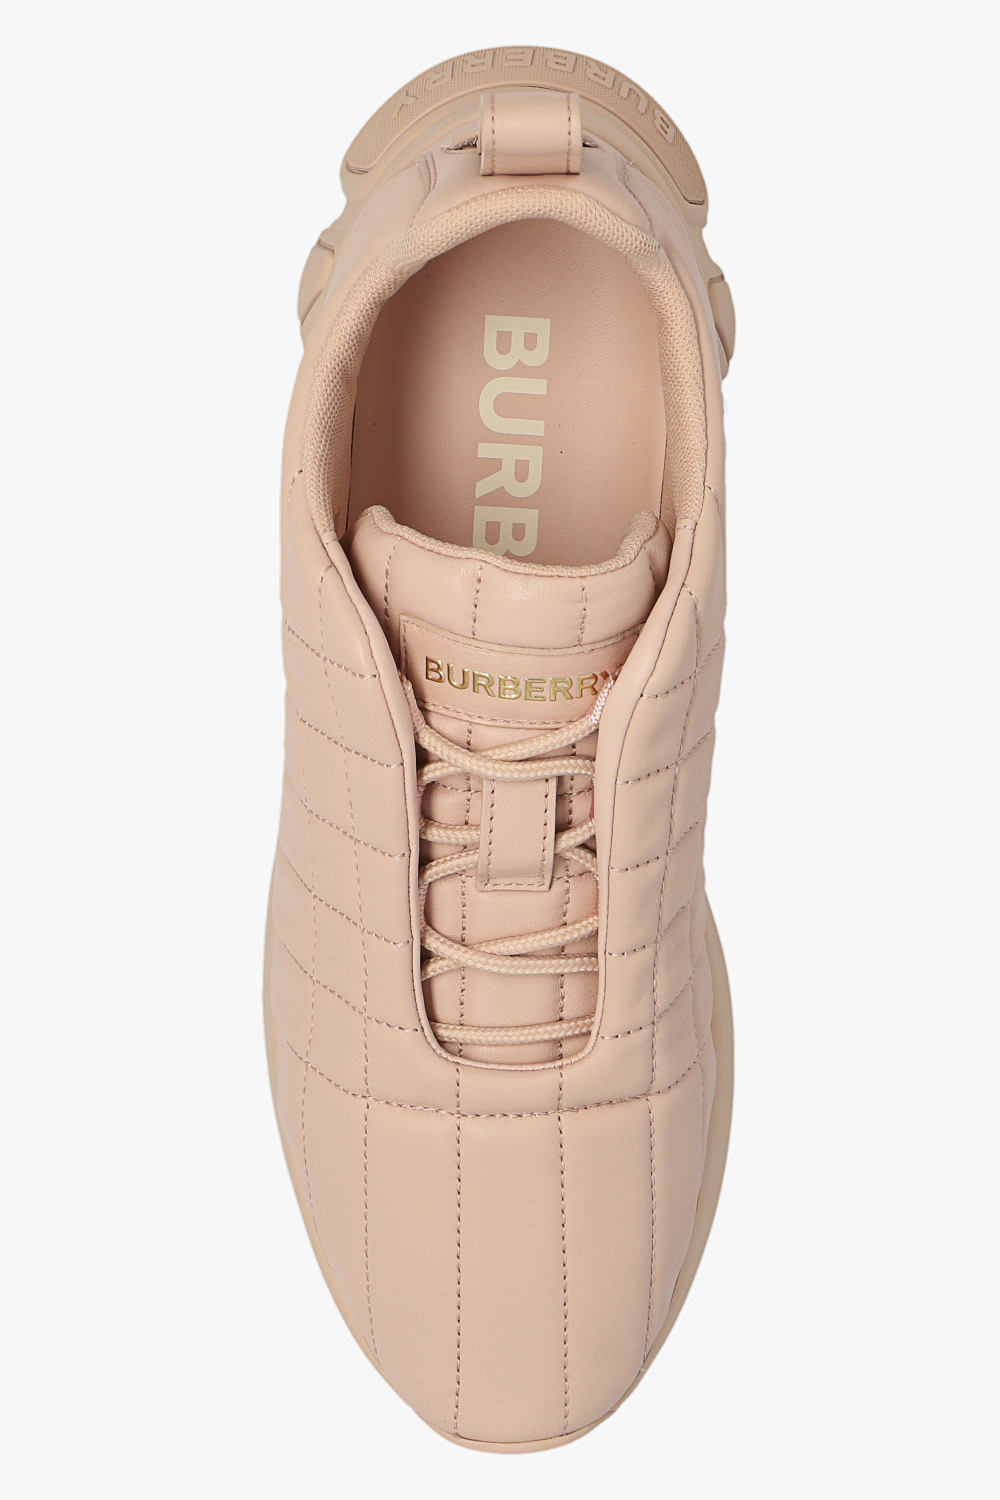 burberry mean ‘TNR Classic’ sneakers